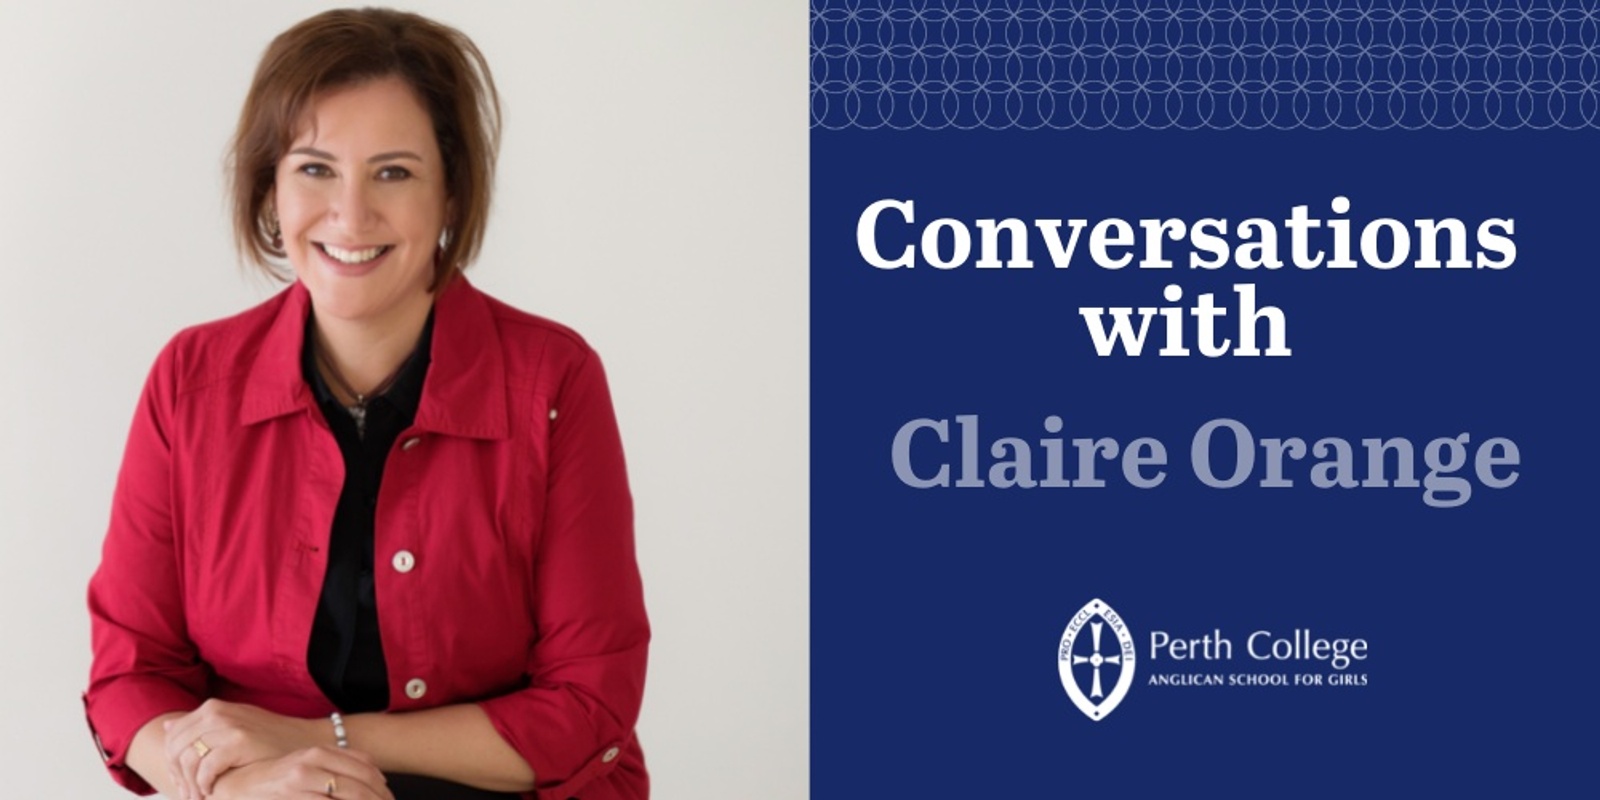 Banner image for Conversations with Claire Orange